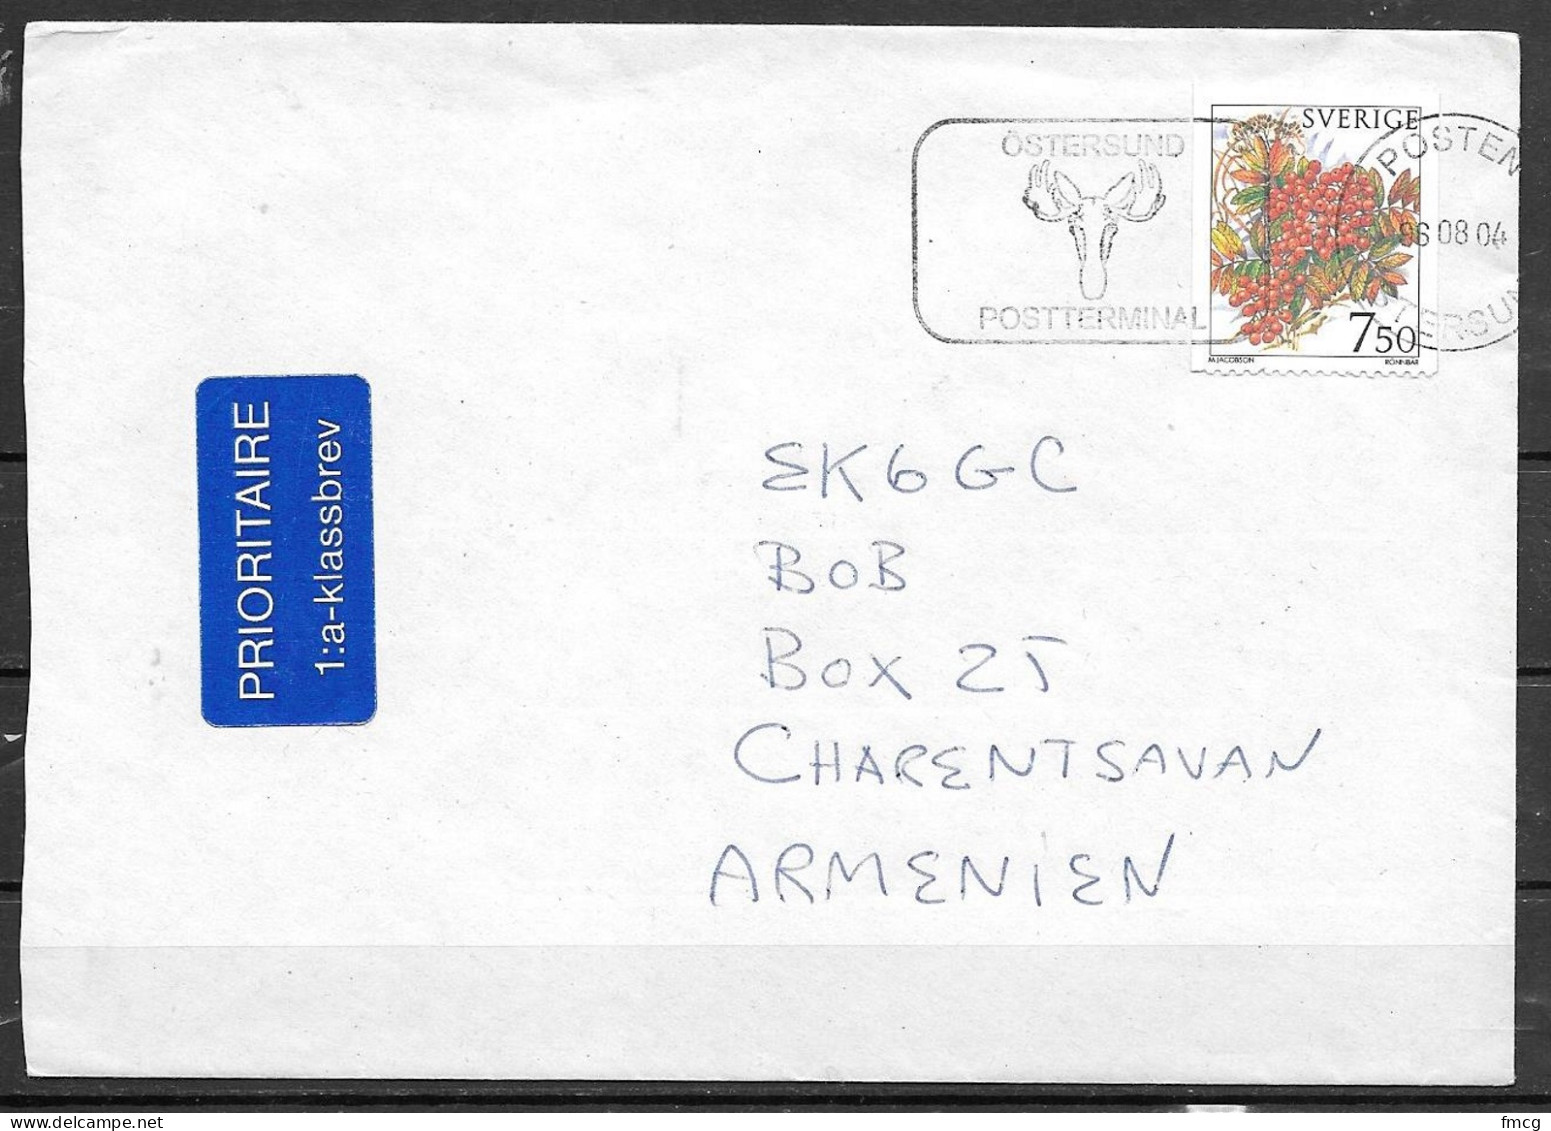 2004 7.50Kr Berries On Cover To Armenia - Covers & Documents